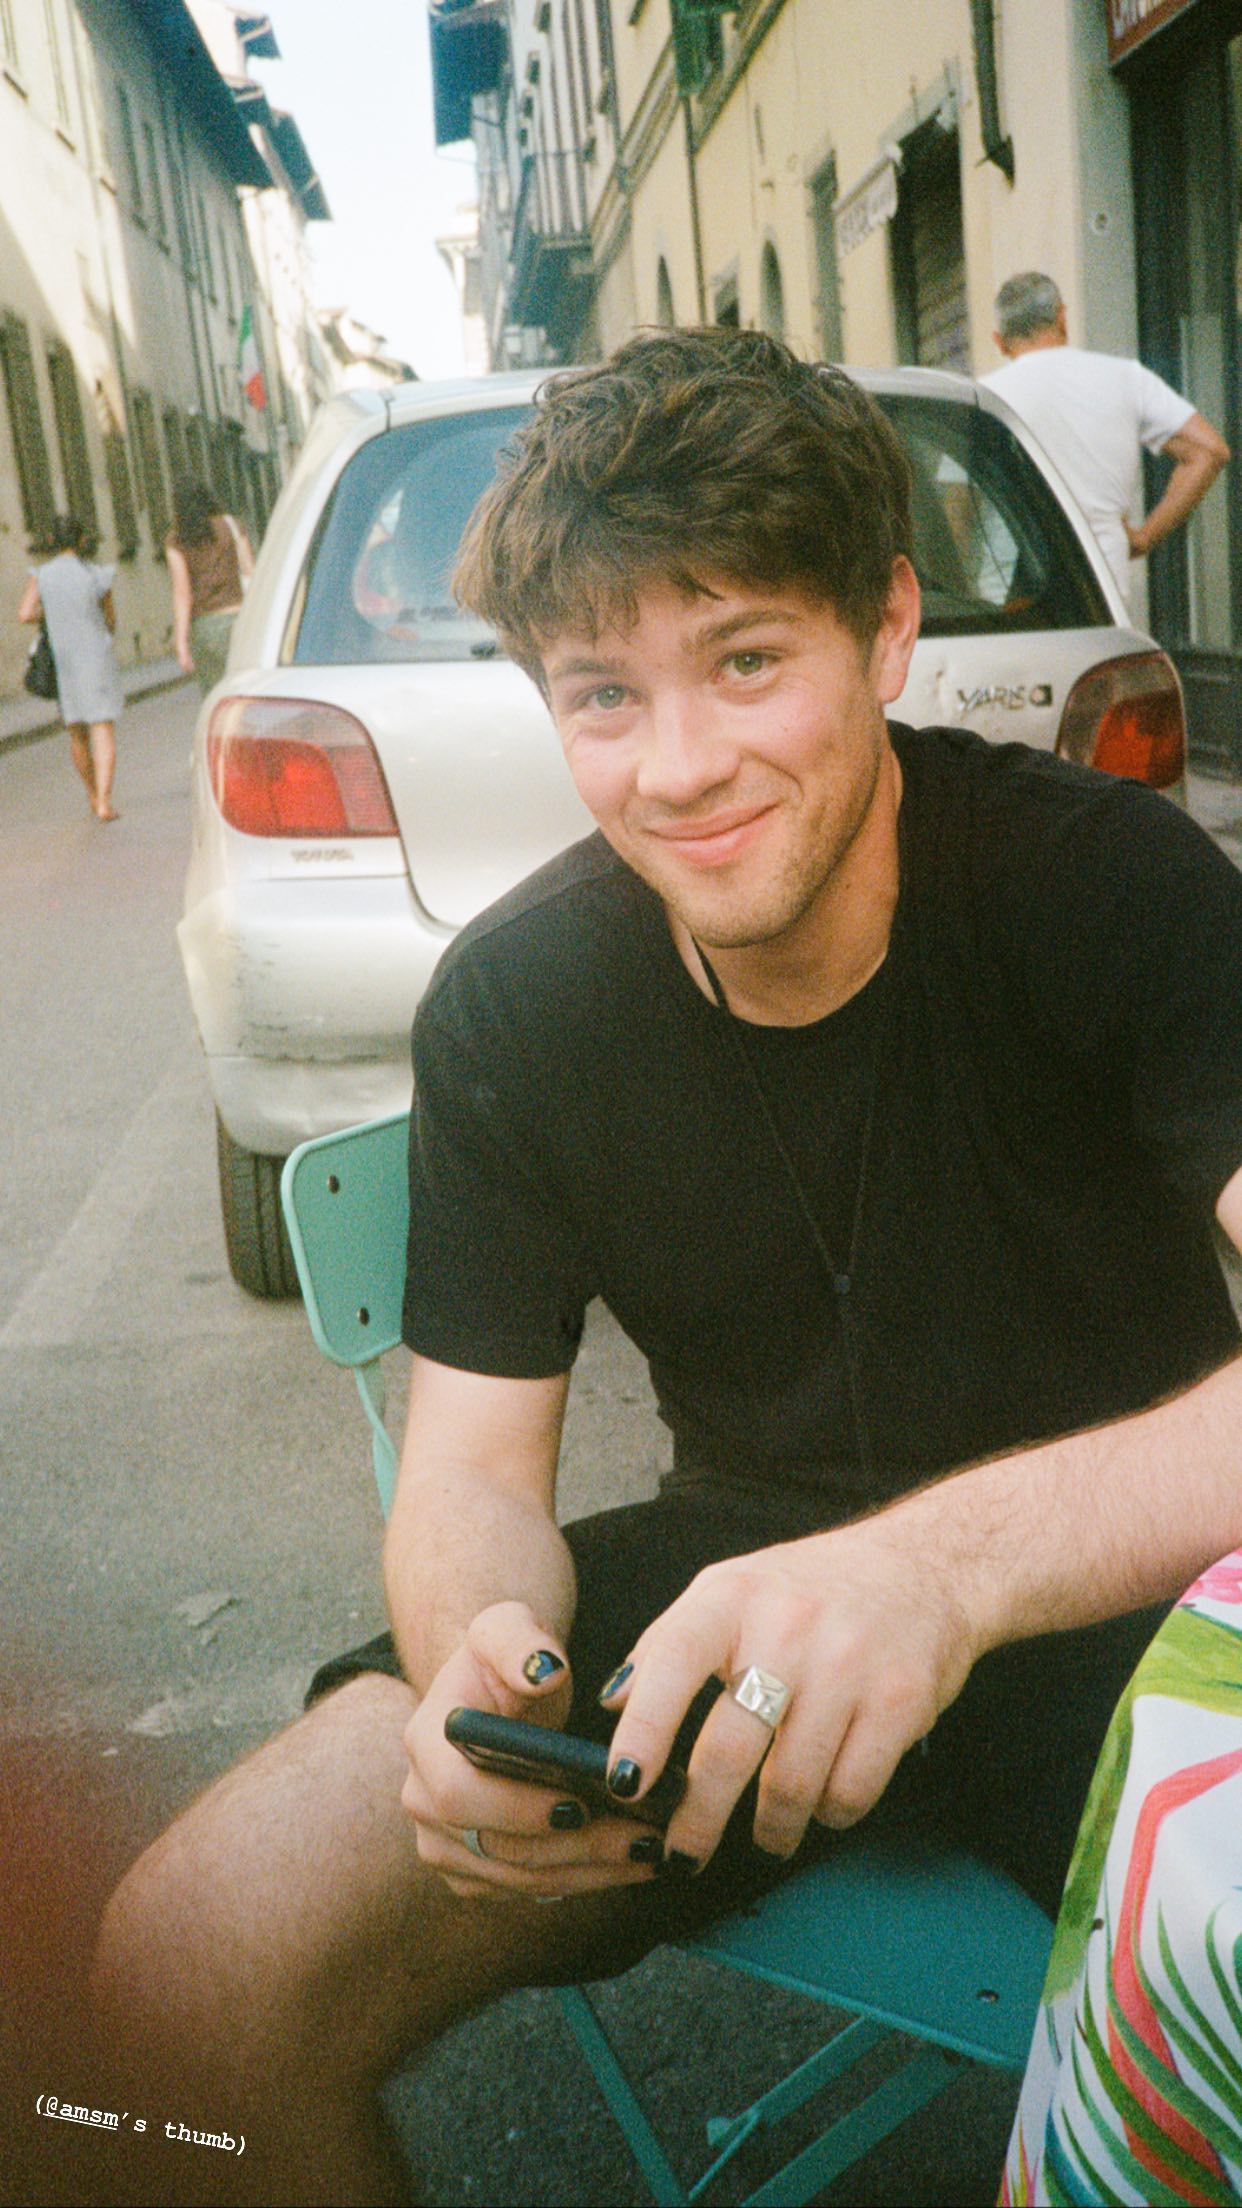 General photo of Connor Jessup